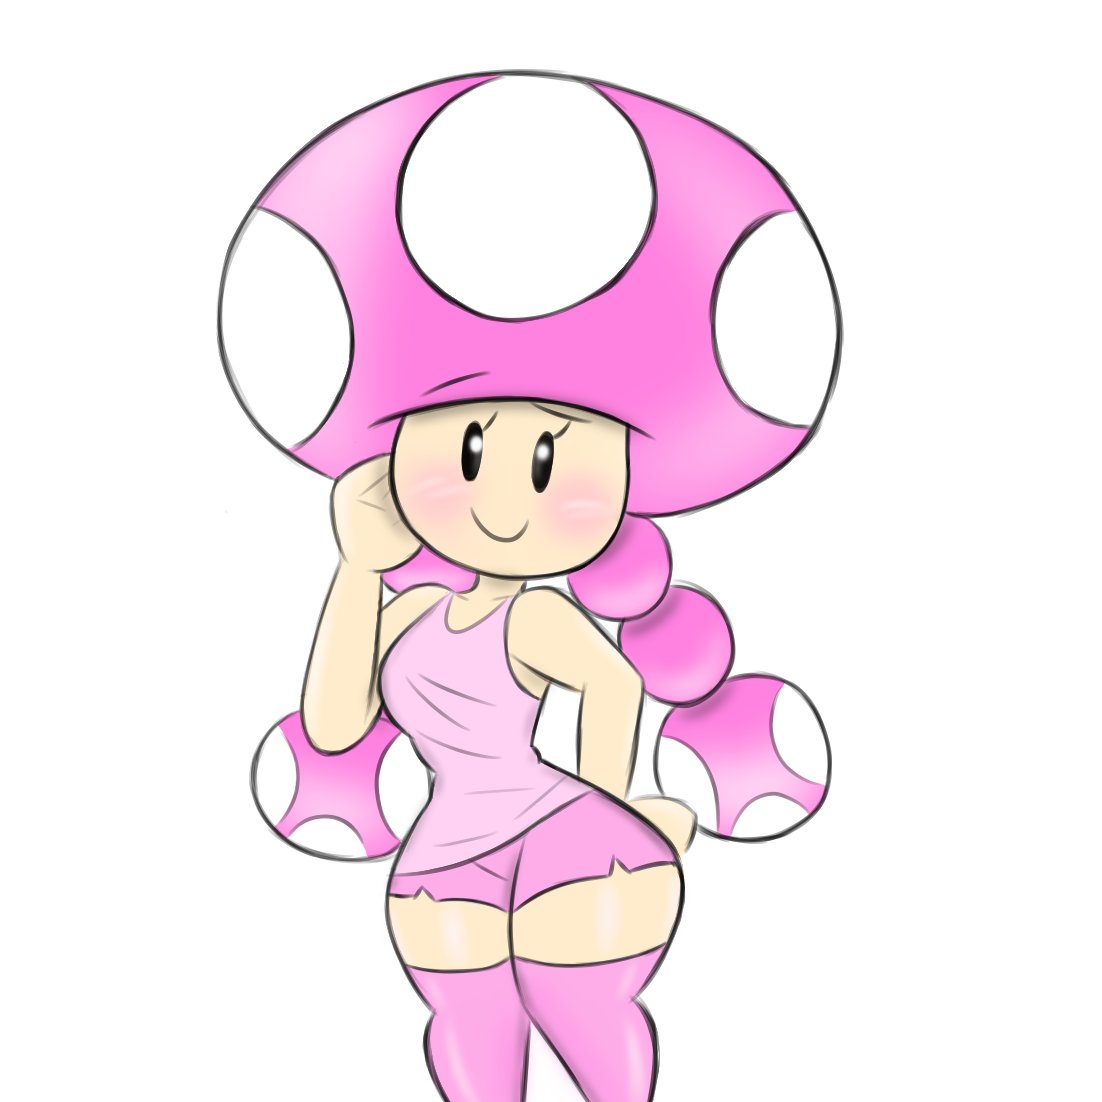 here's the toadette drawing for tonight, fuckin' love this pink b...